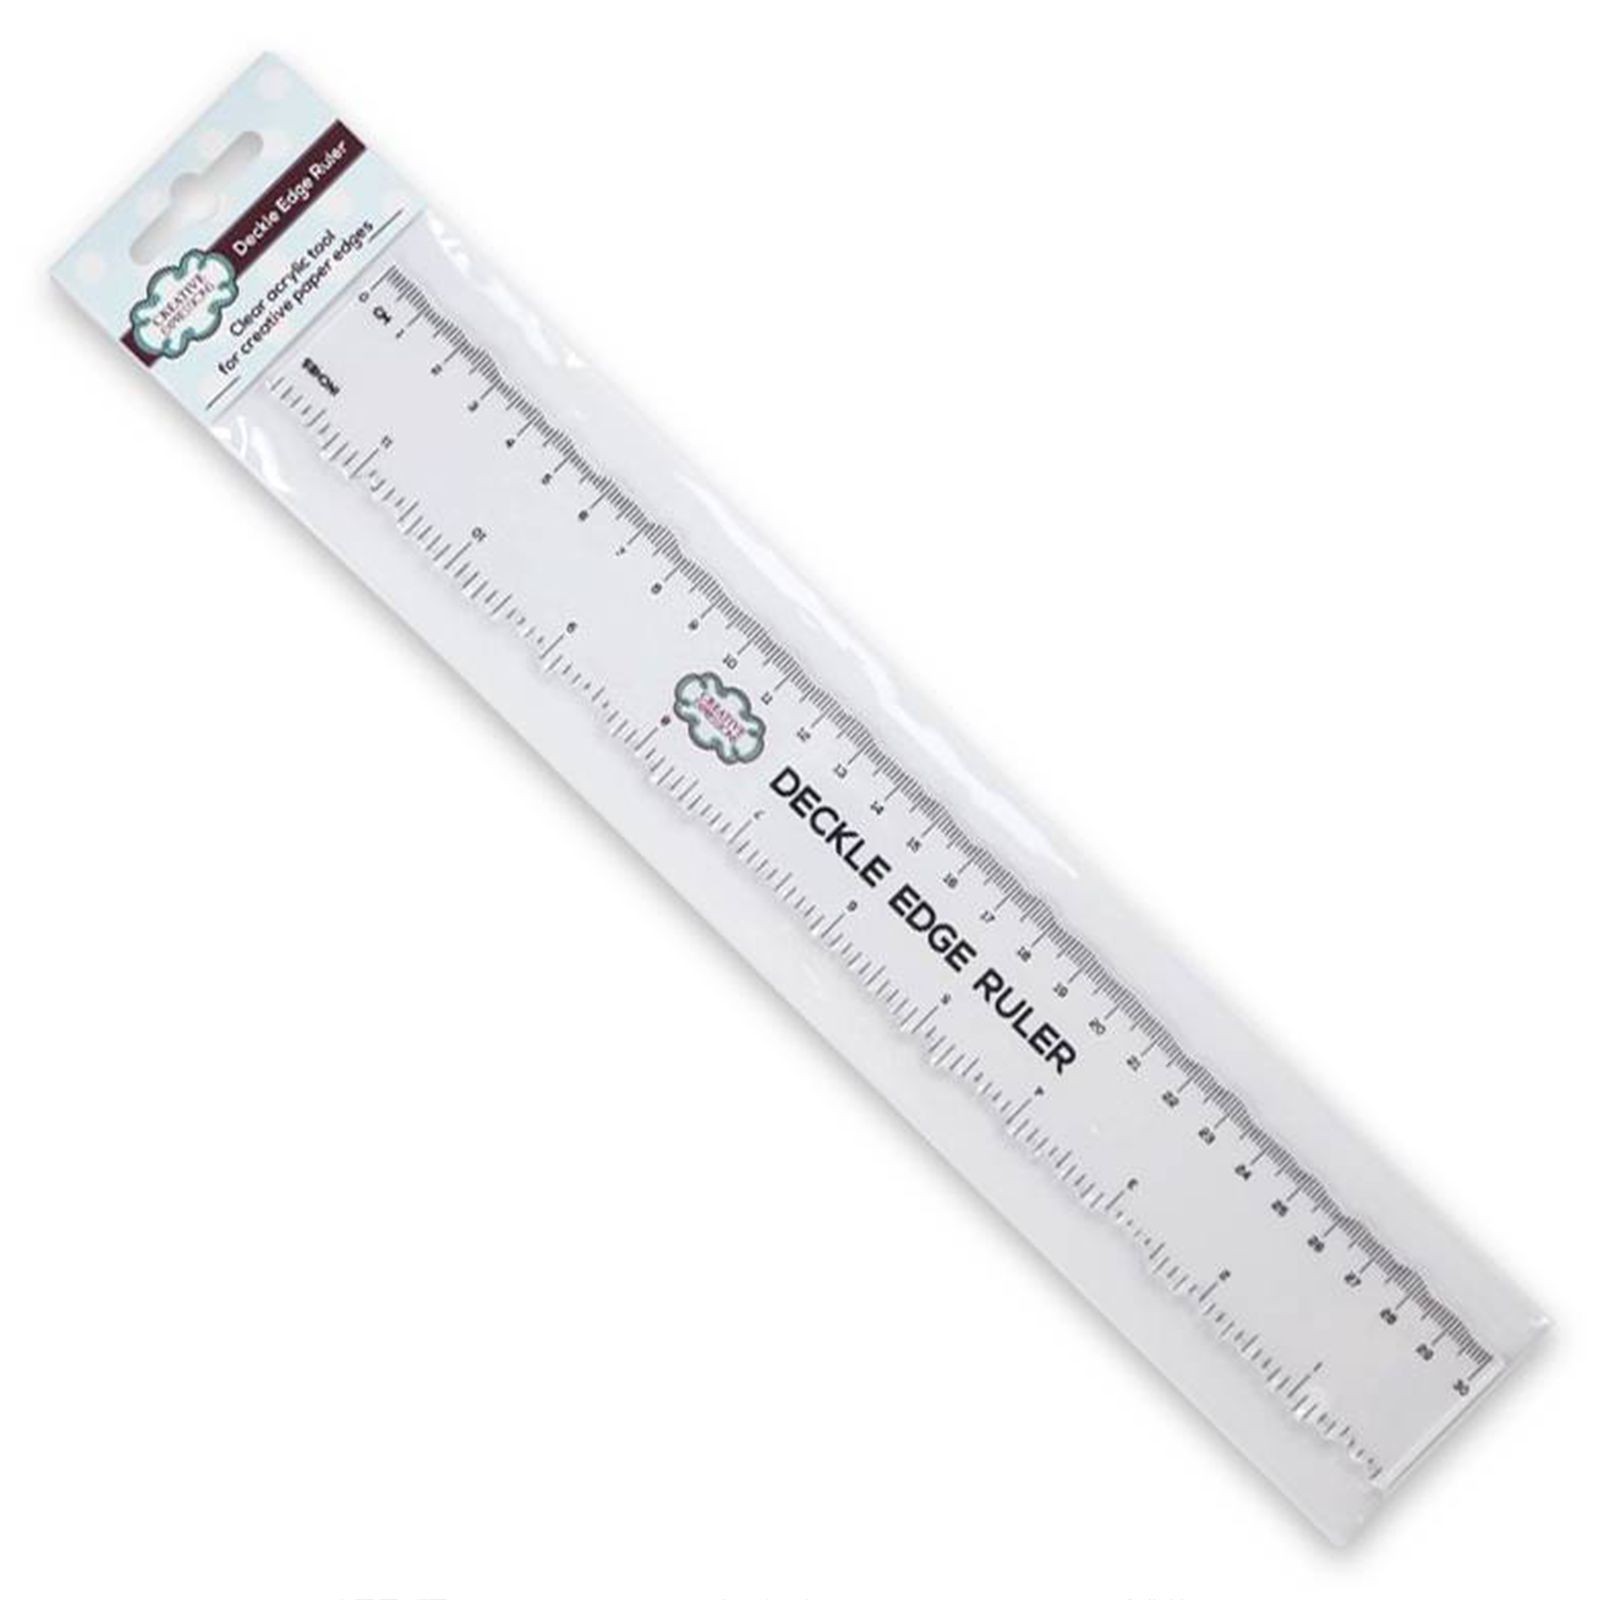 Creative Expressions • Deckle edge ruler